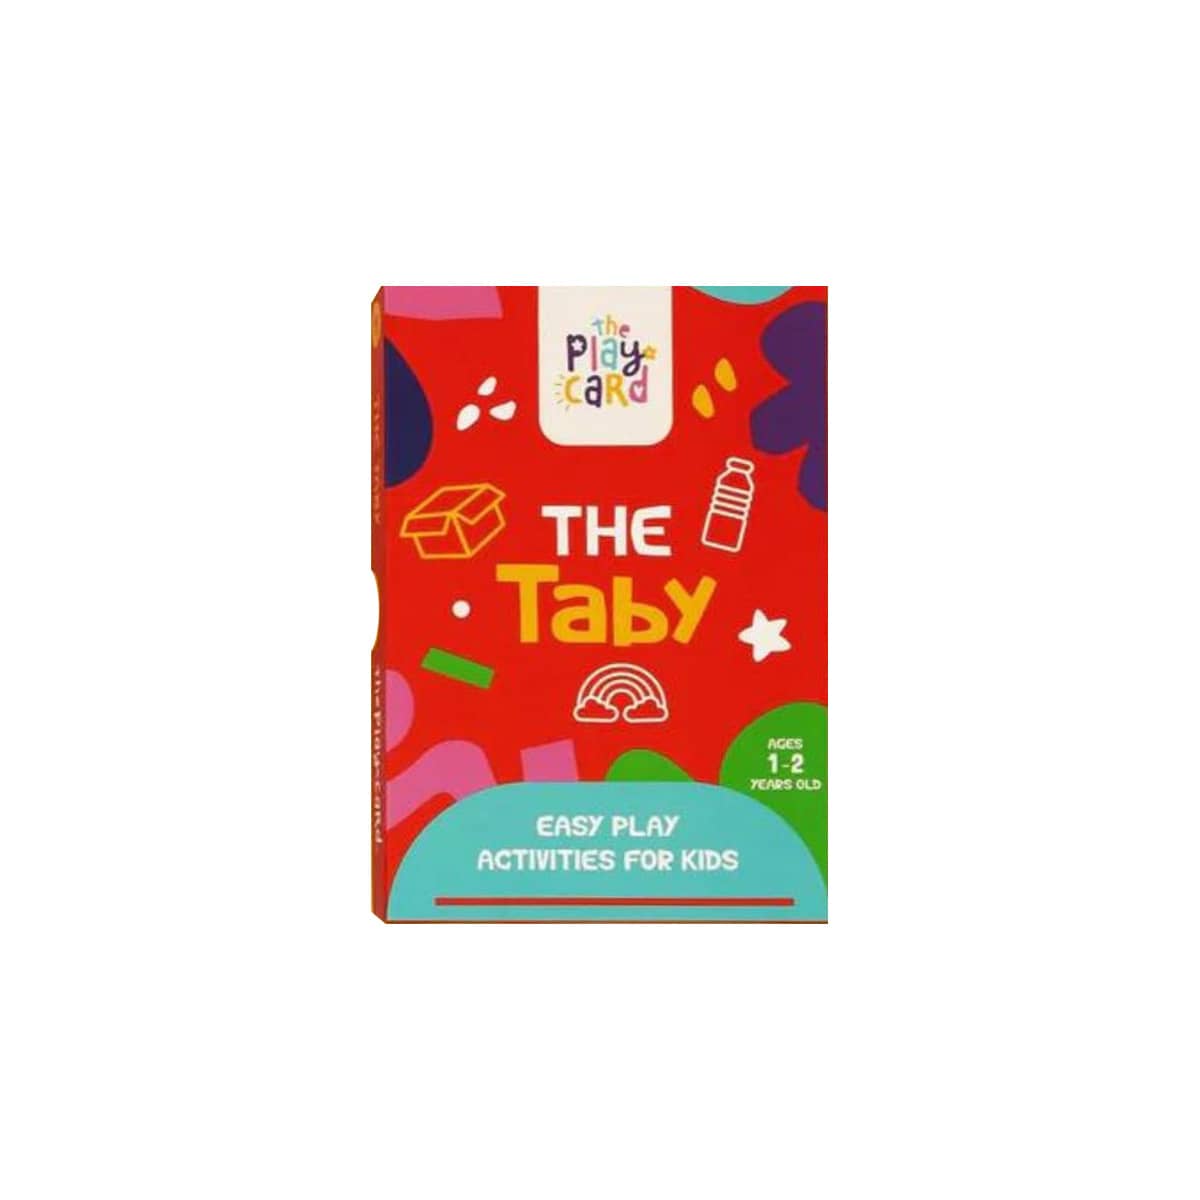 The Play Card Co - Play Cards - The Taby